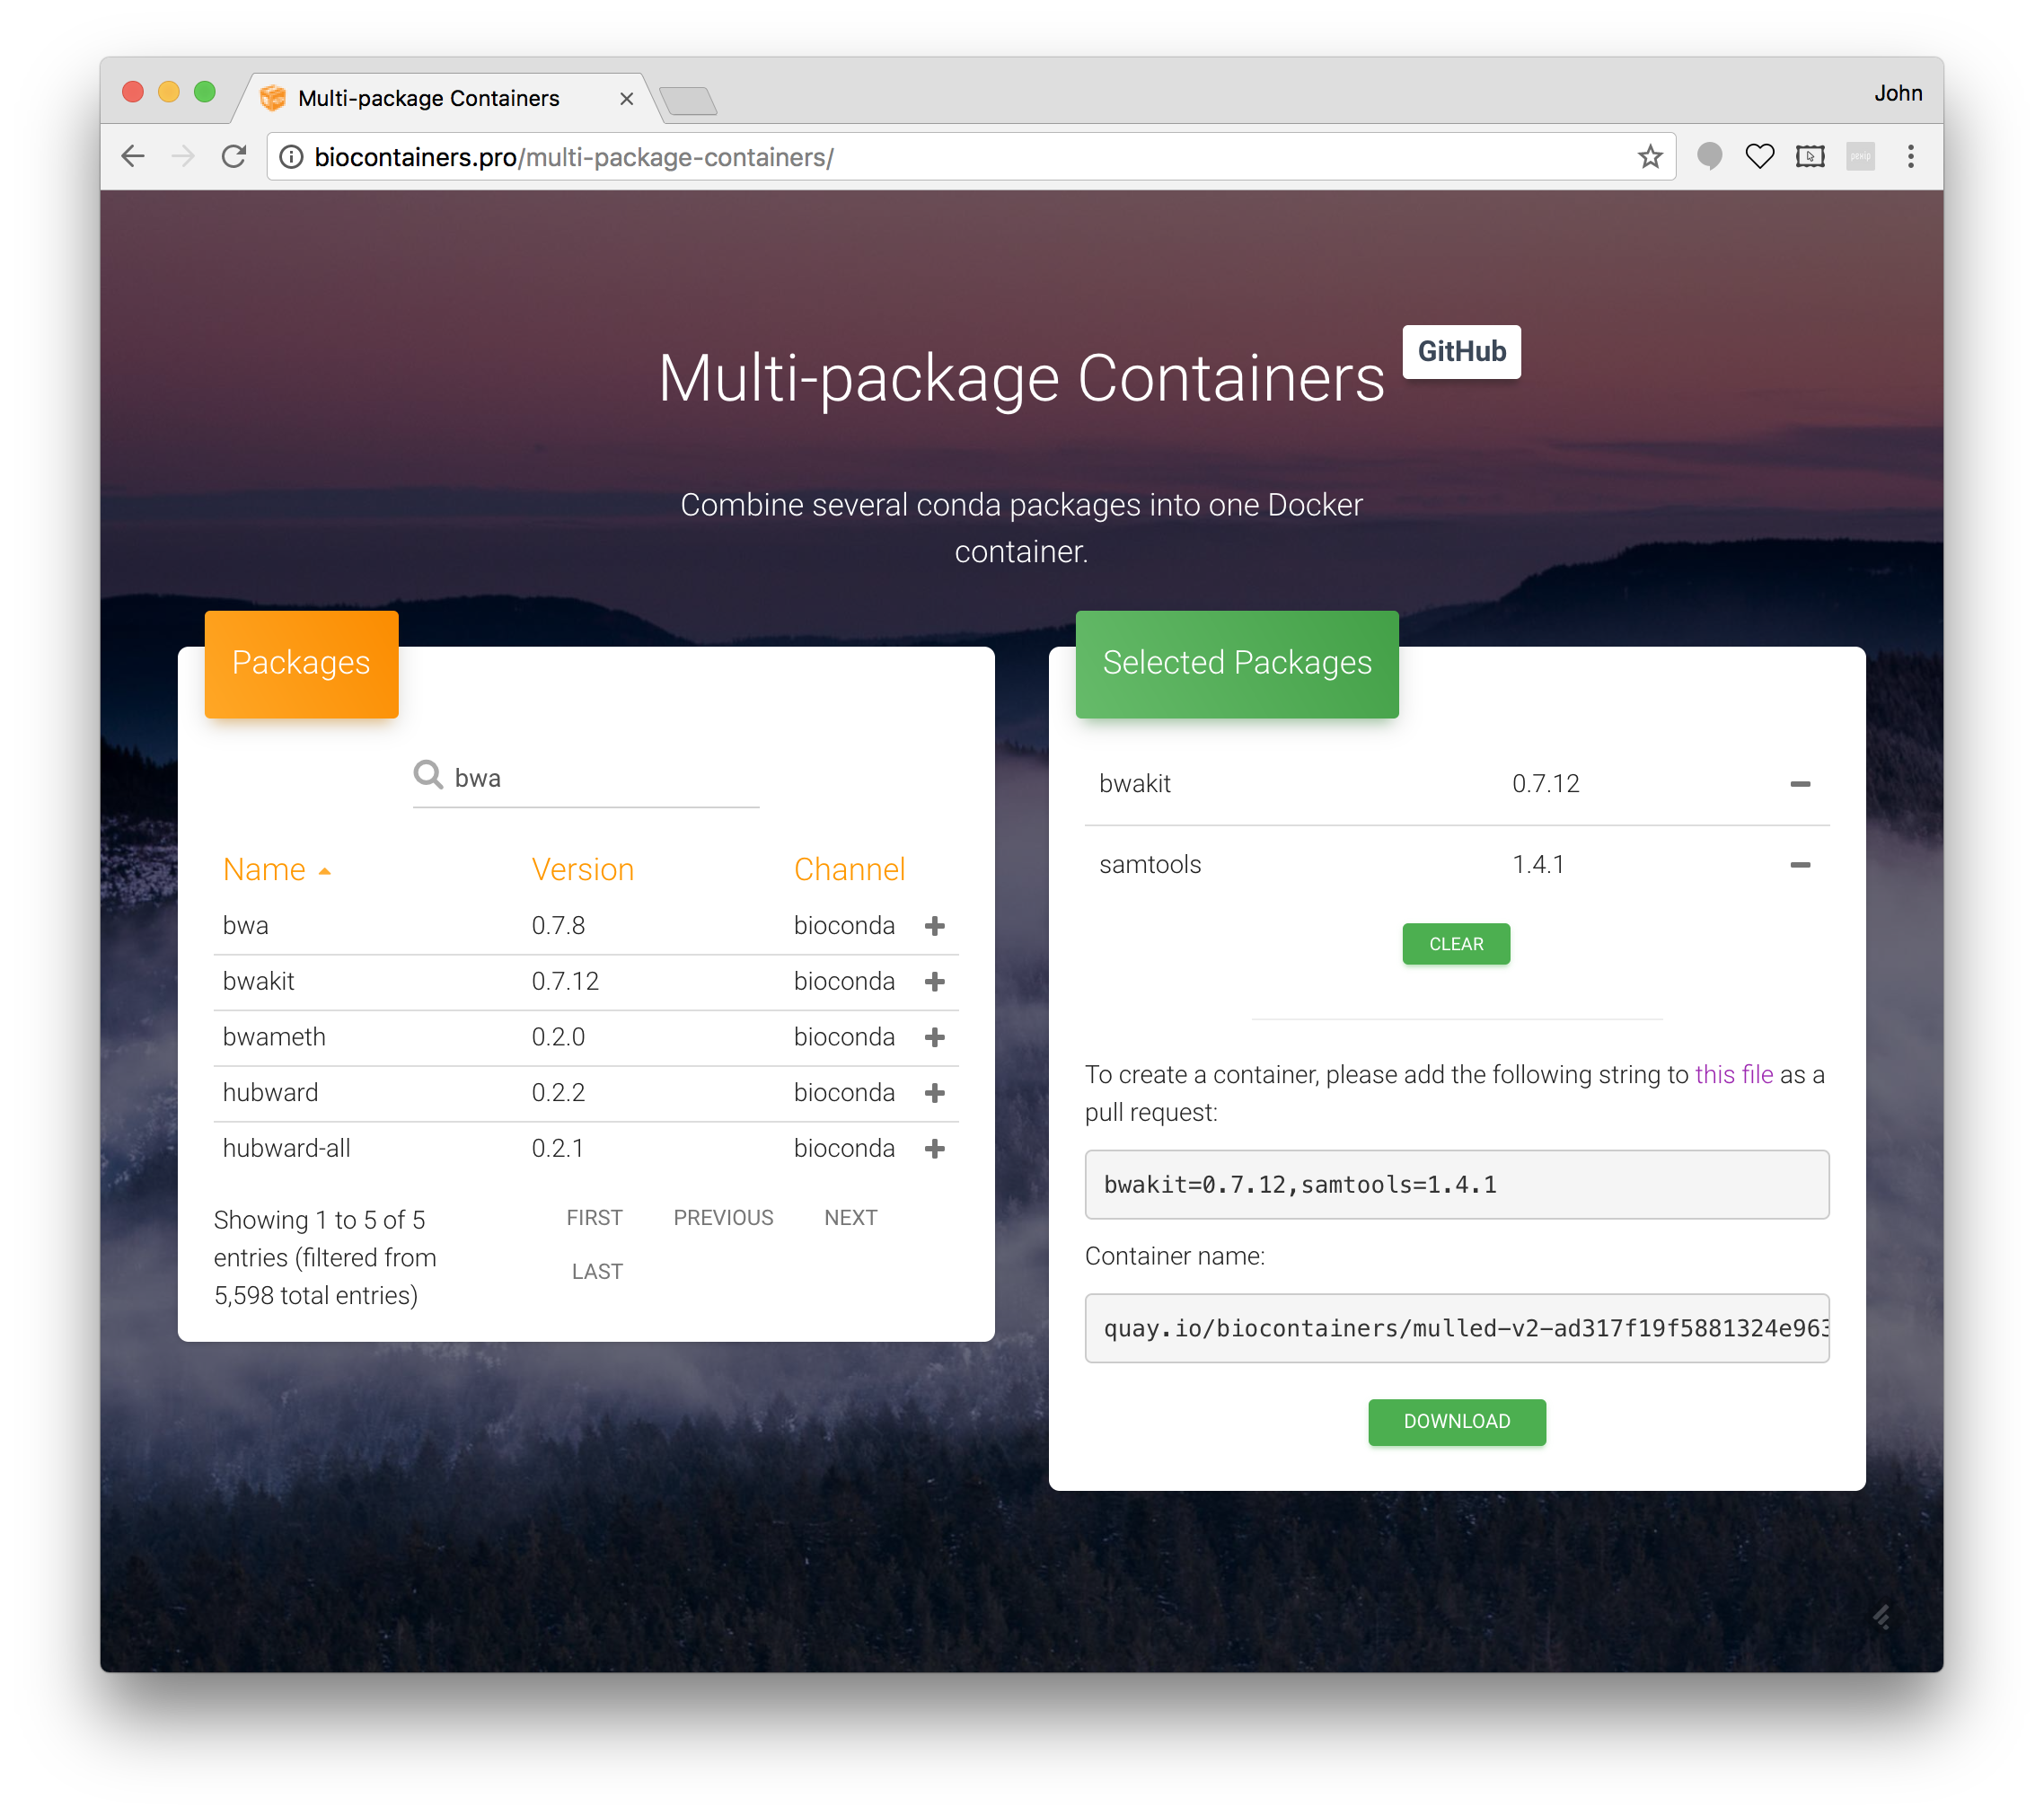 Screenshot of biocontainers page showing an information page for multi-package containers